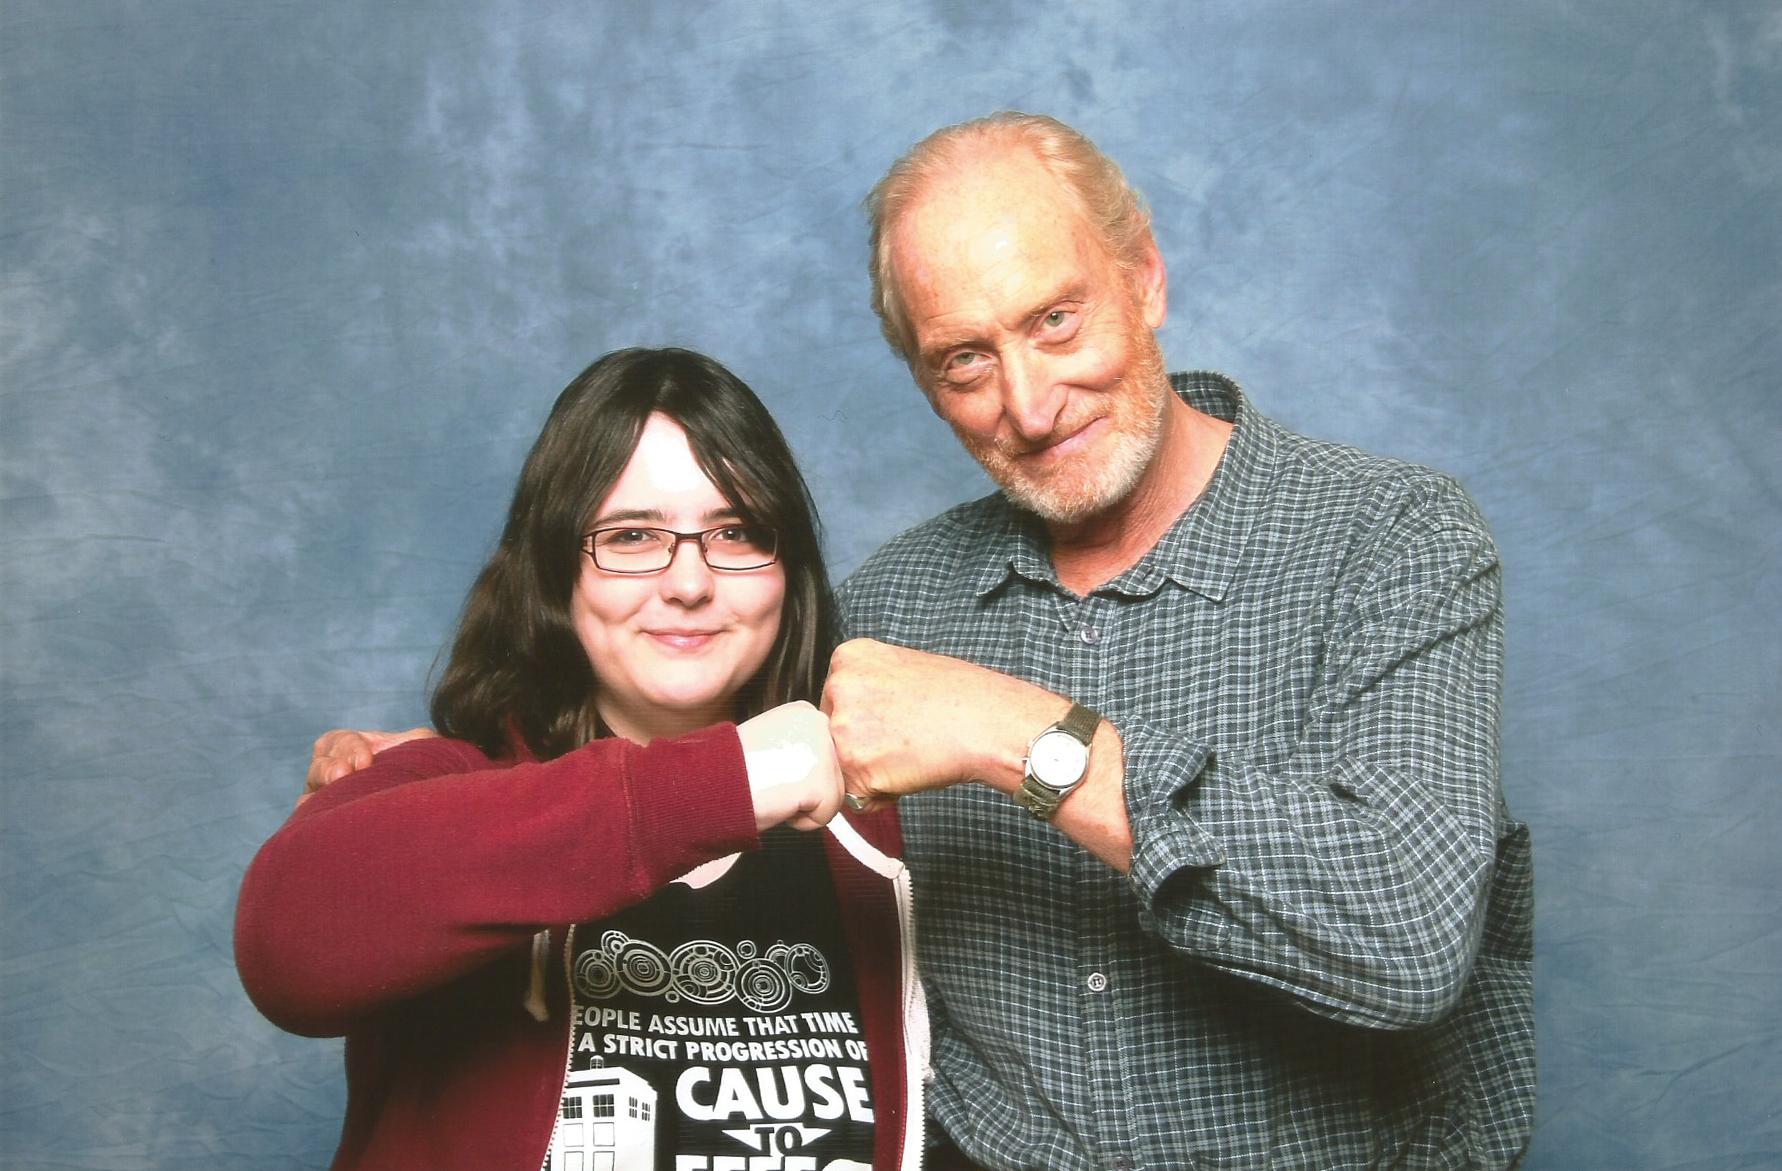 Charles Dance With a Fan